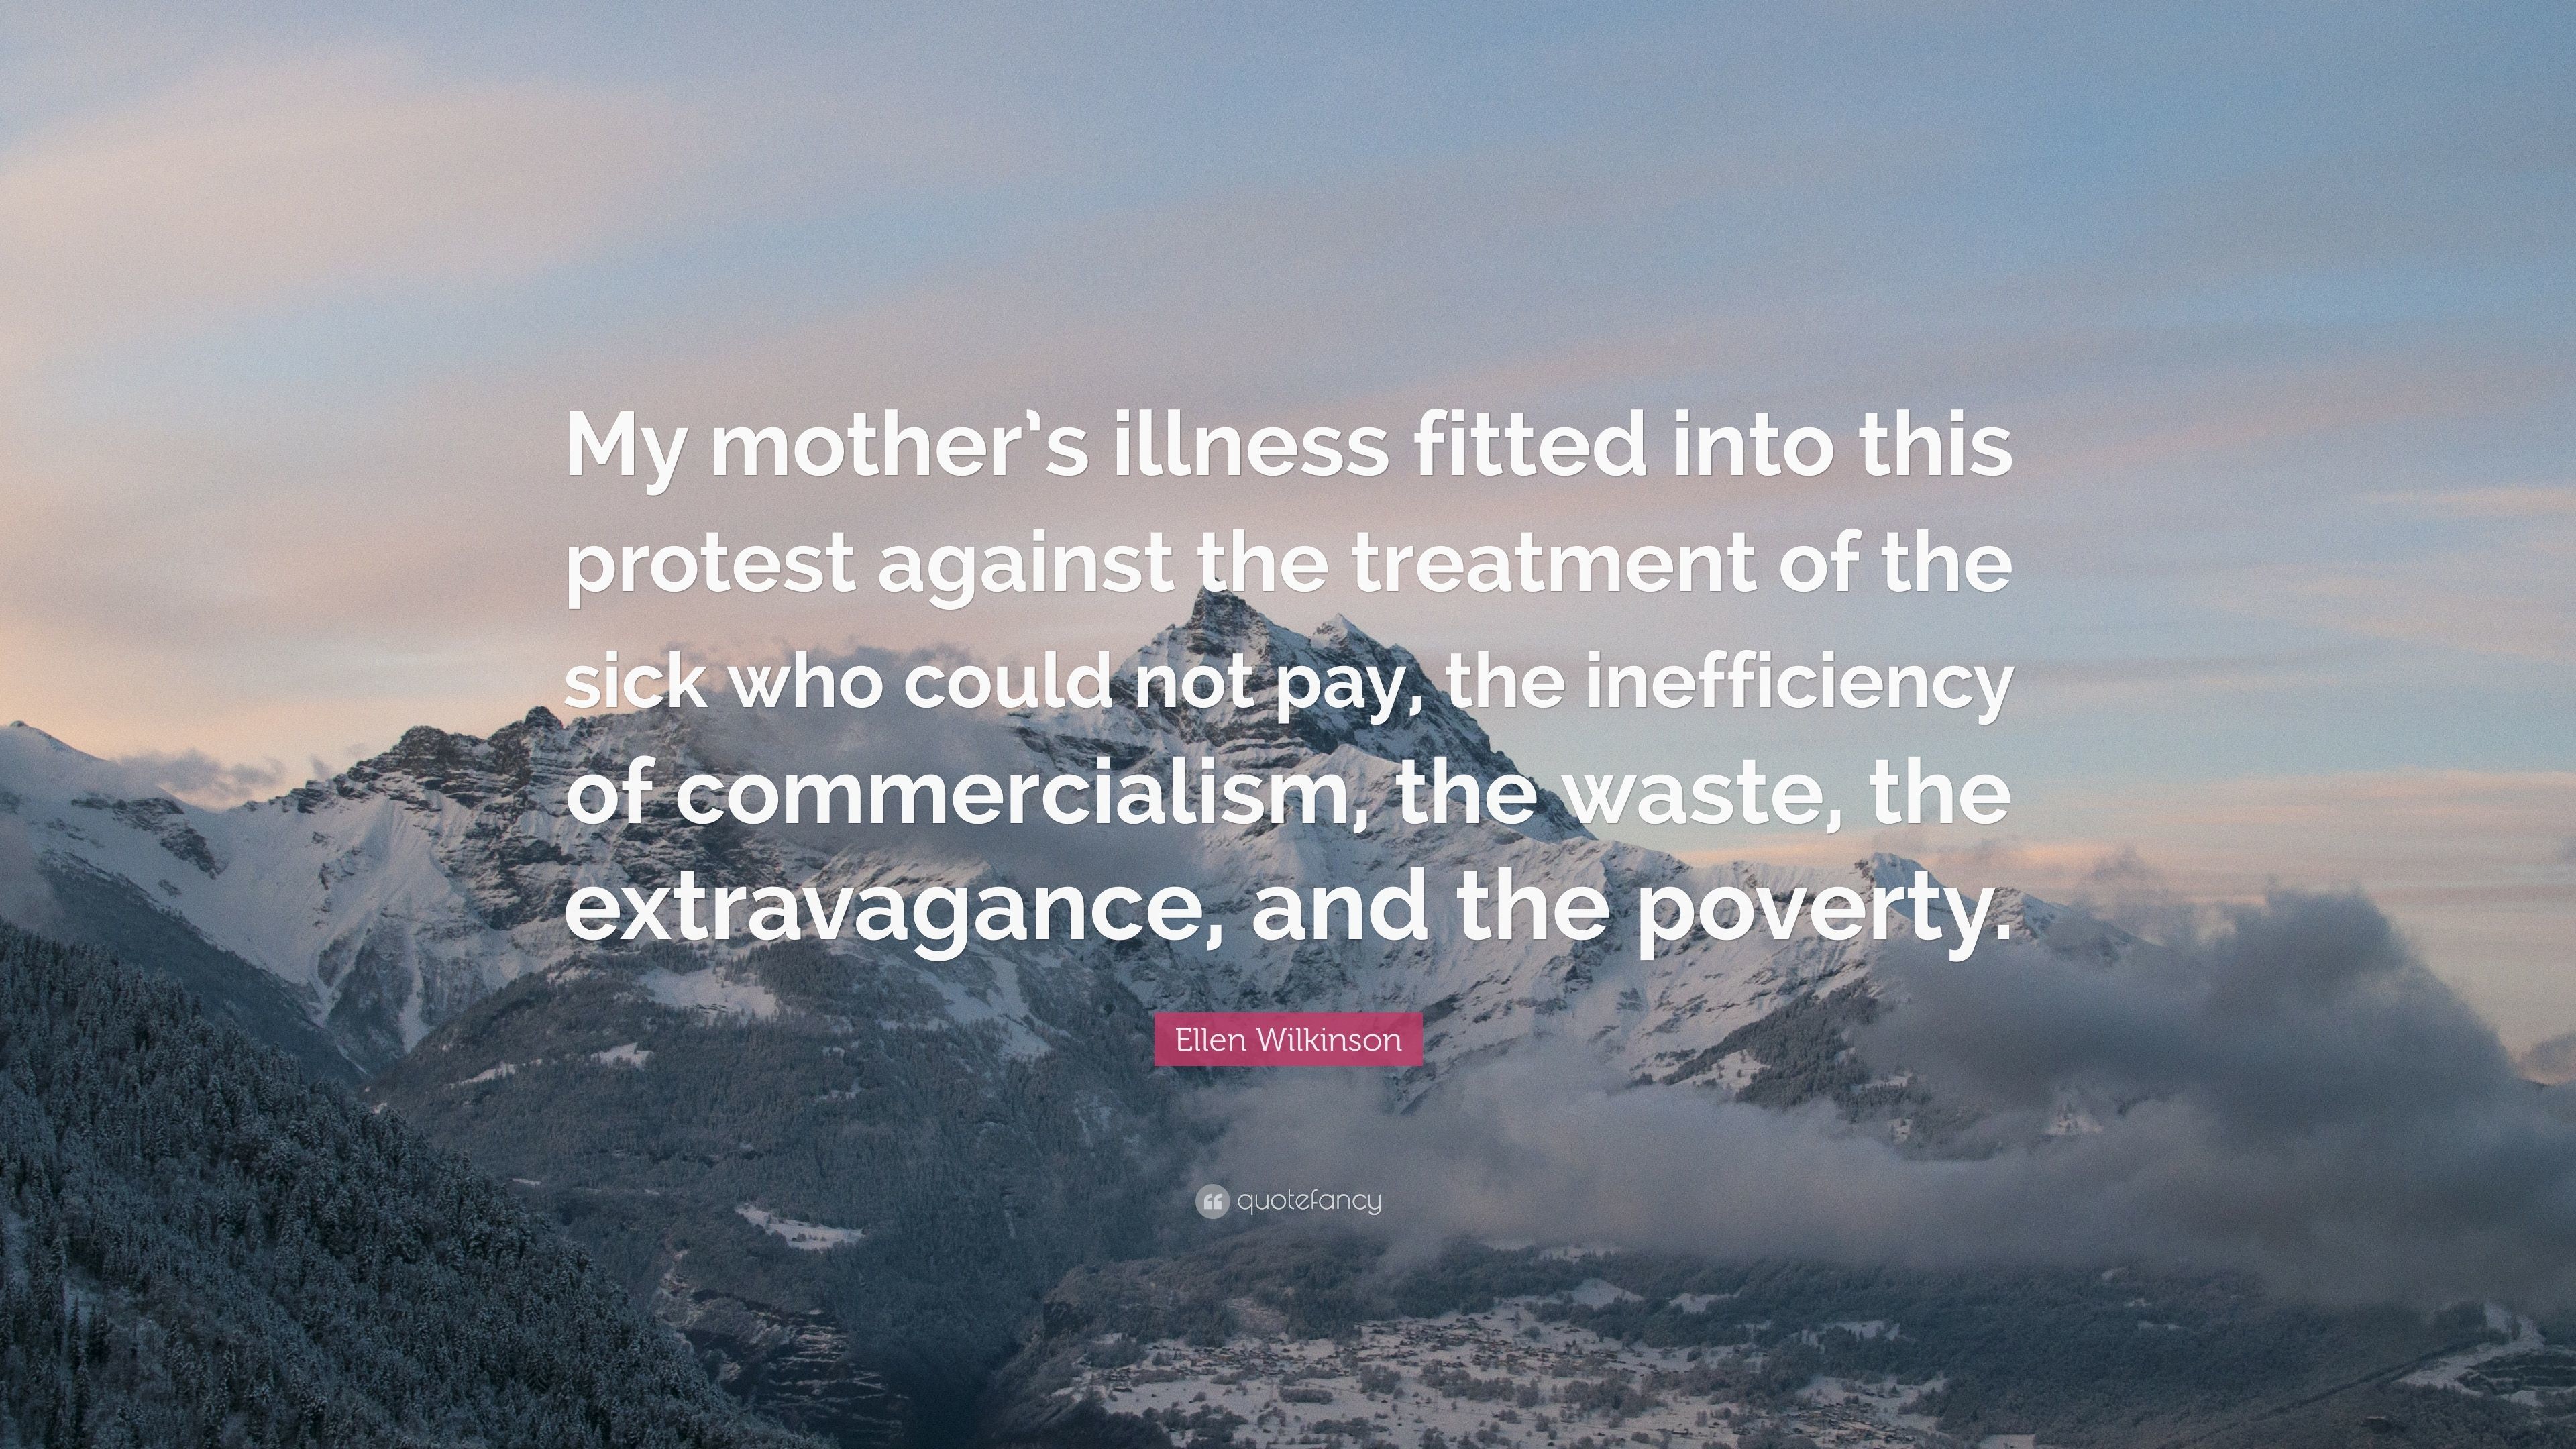 3840x2160 Ellen Wilkinson Quote: “My mother's illness fitted into this protest  against the treatment of